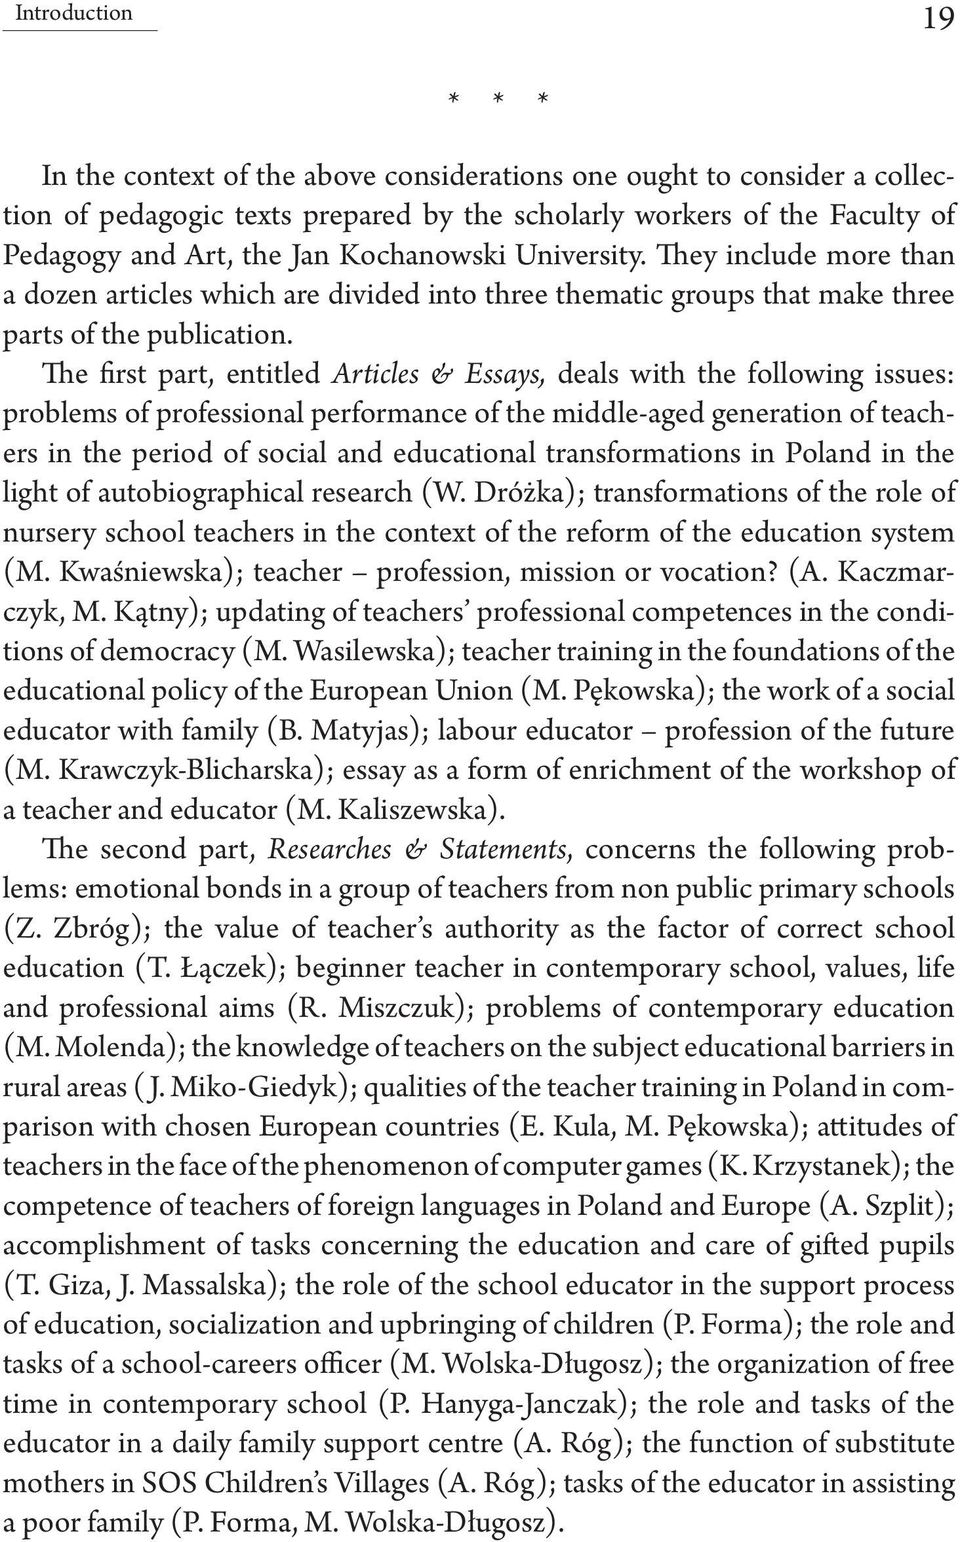 The first part, entitled Articles & Essays, deals with the following issues: problems of professional performance of the middle-aged generation of teachers in the period of social and educational